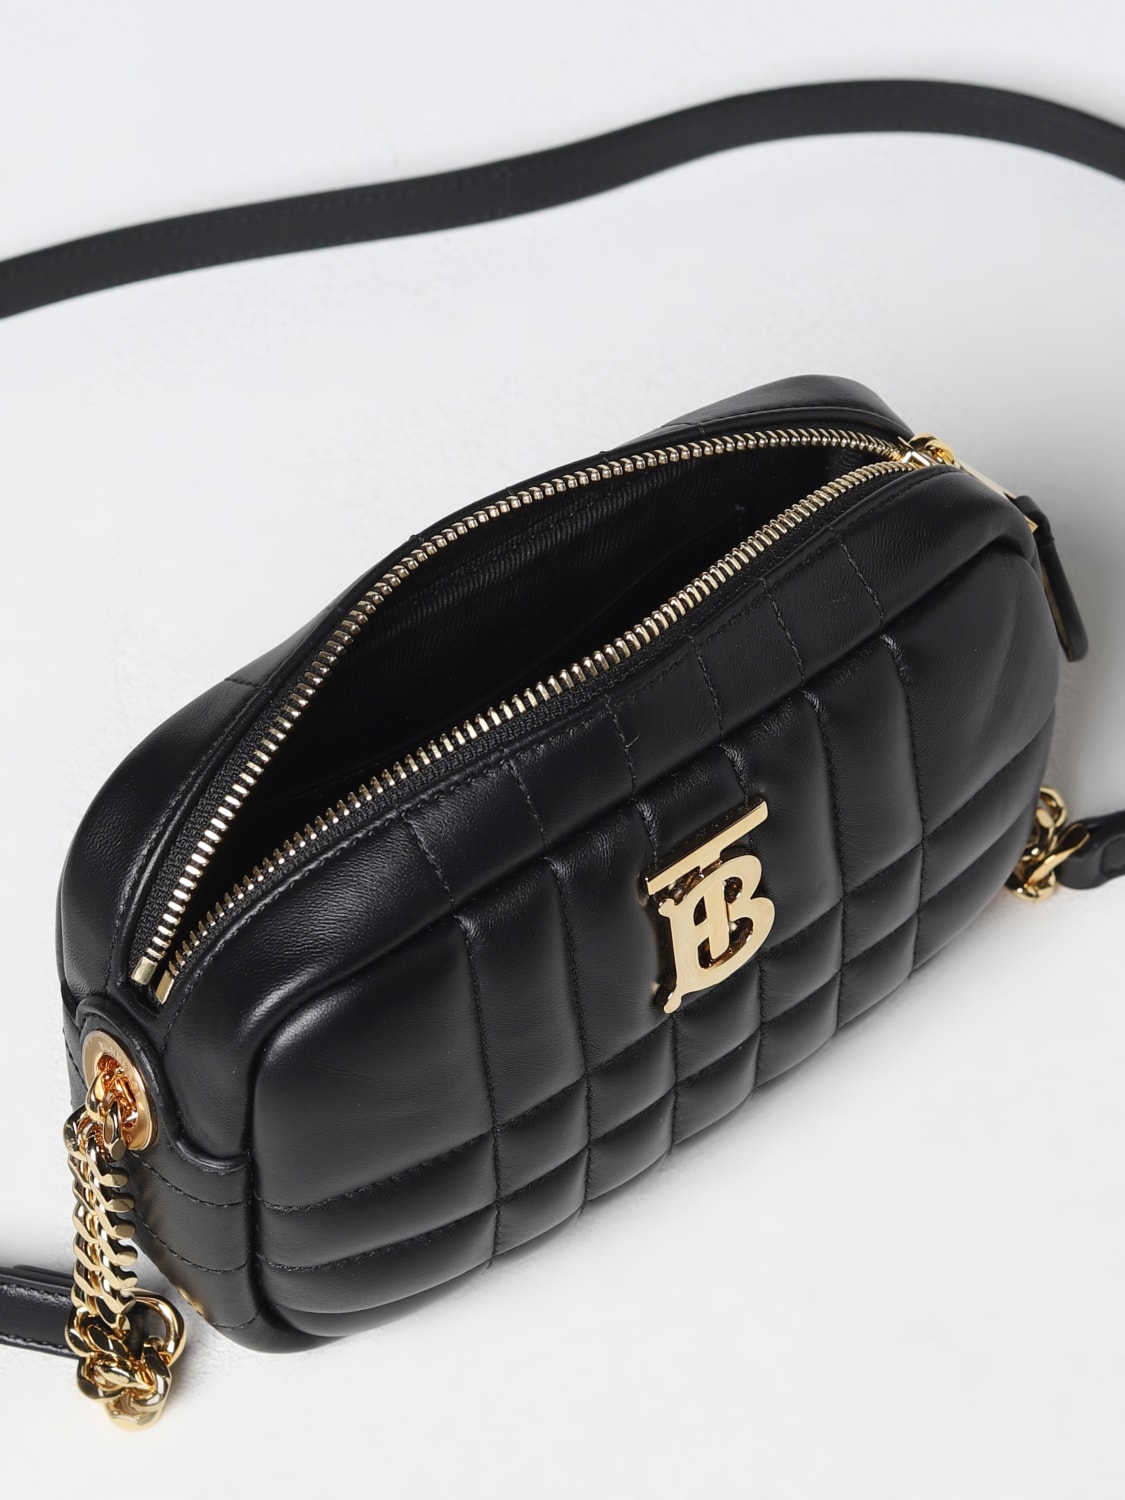 Burberry, Bags, Burberry Tb Quilted Leather Belt Bag